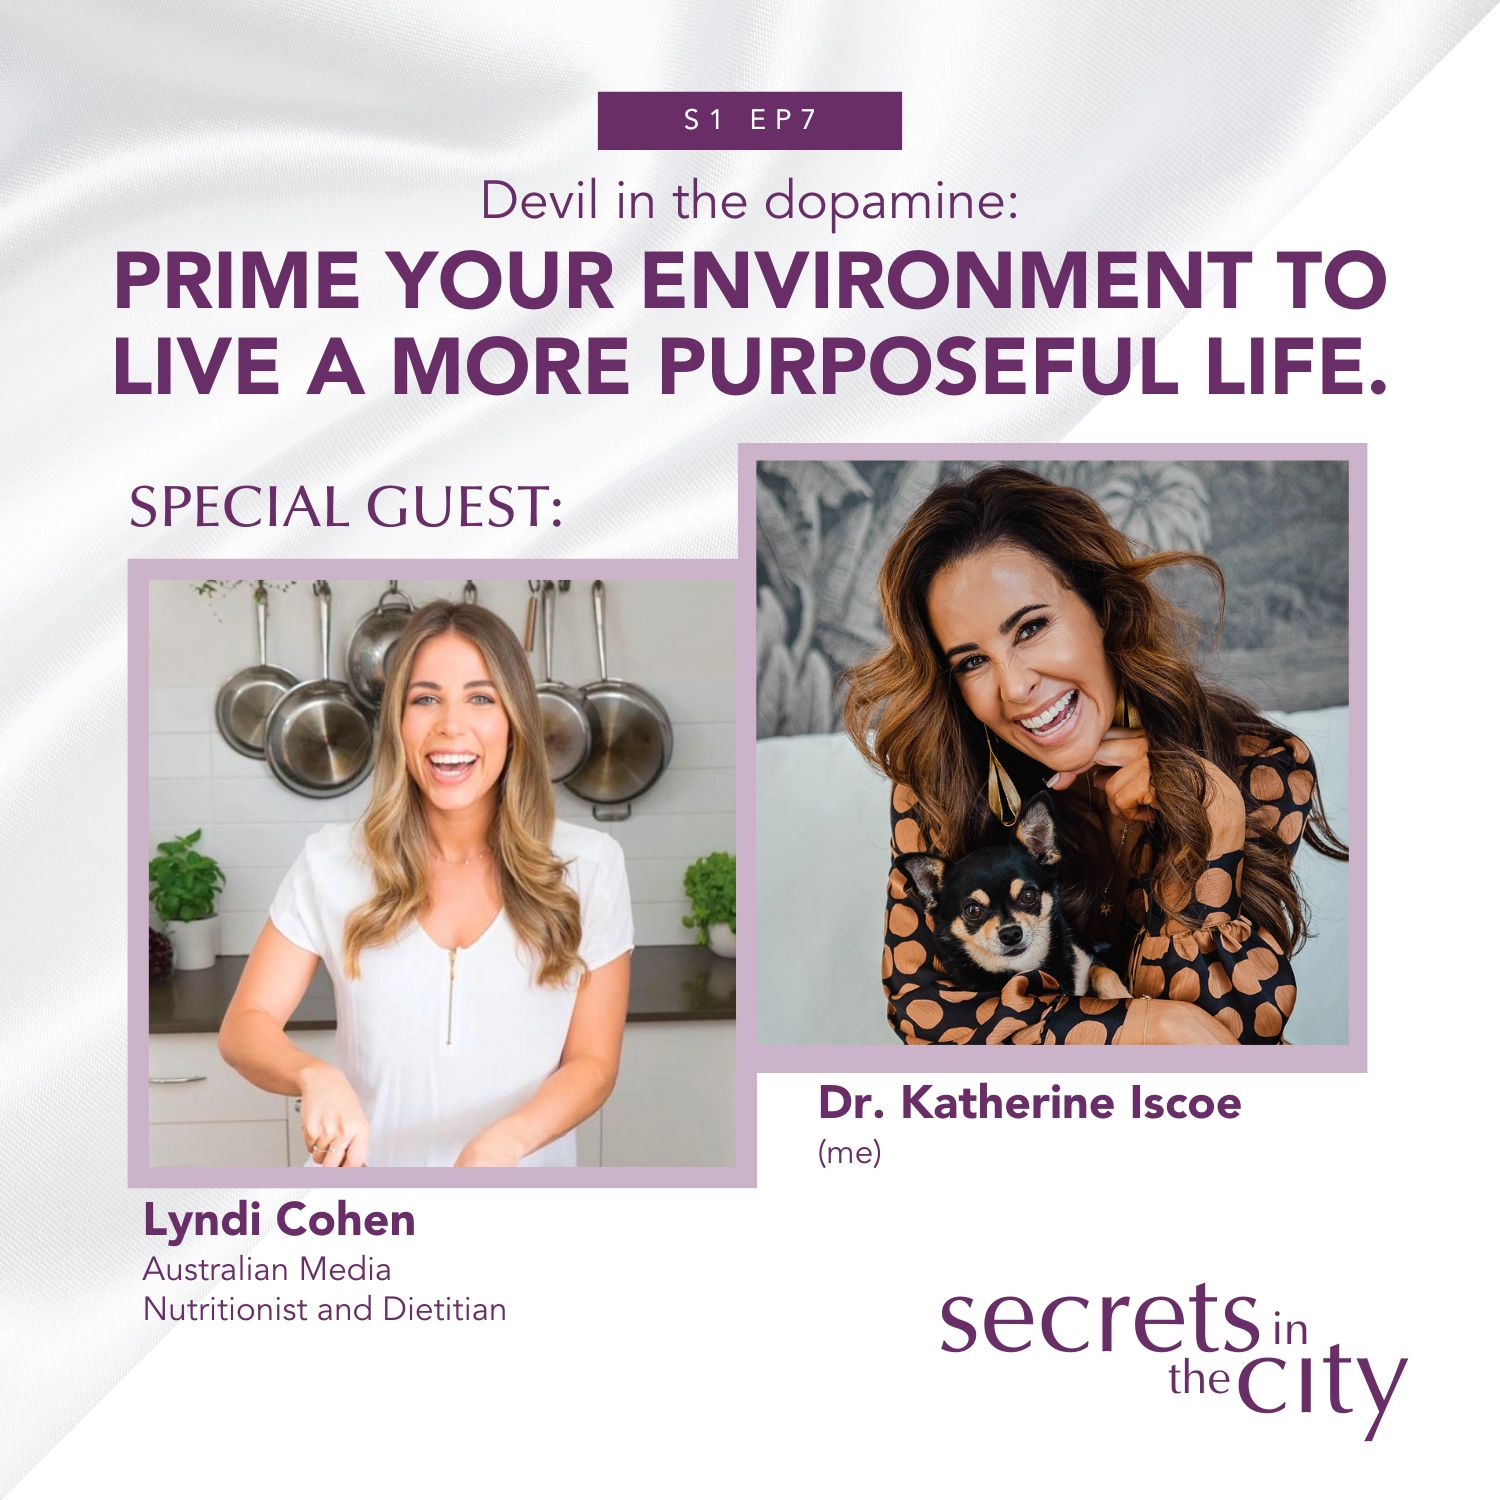 Devil in the dopamine: Lyndi Cohen shares how to prime your environment to live a more purposeful life.